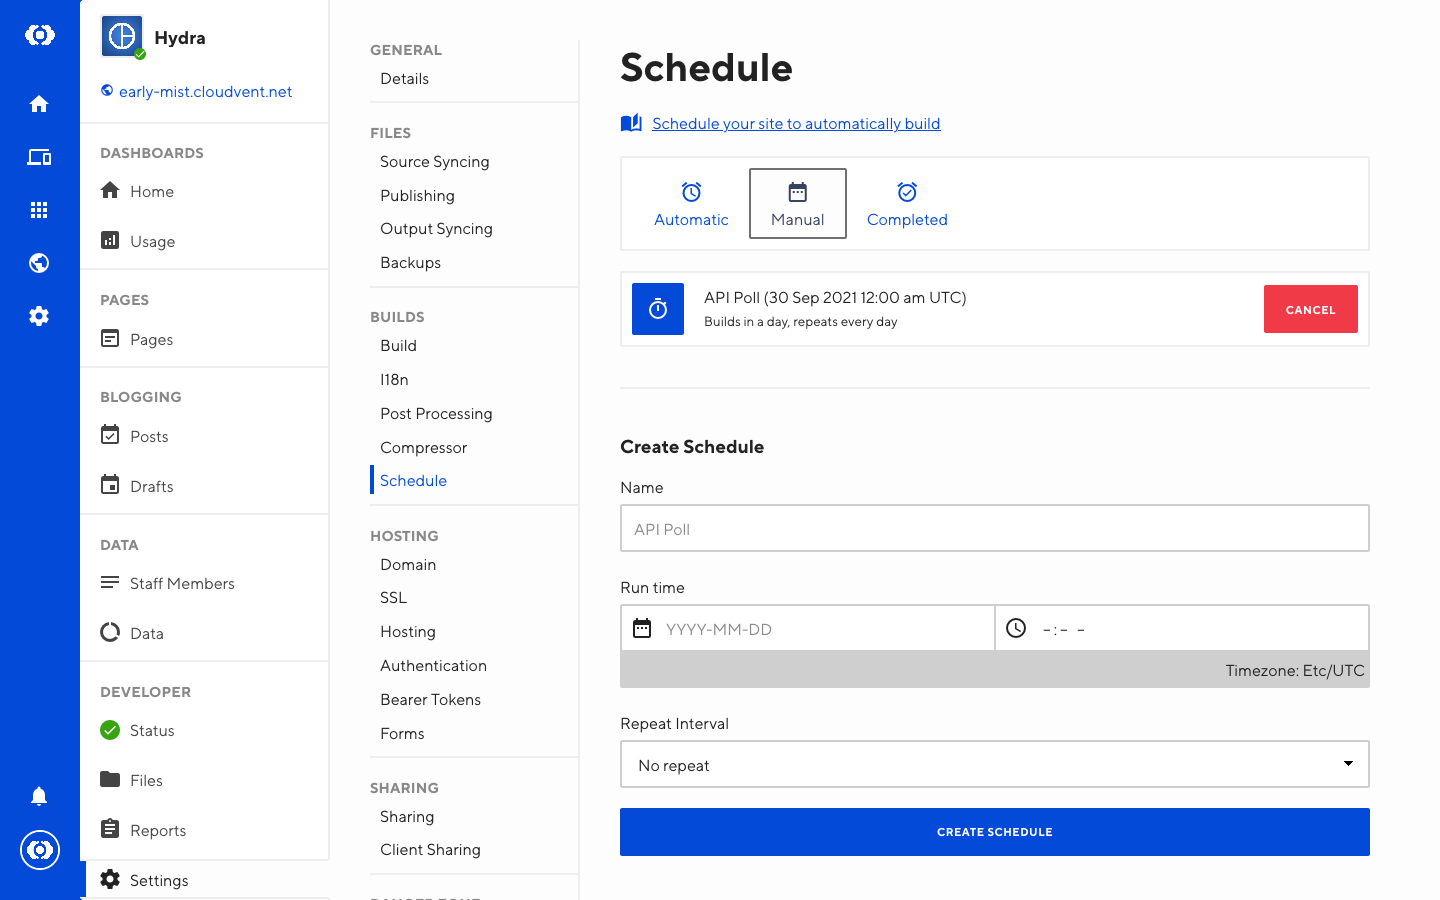 Manual Builds Schedule interface